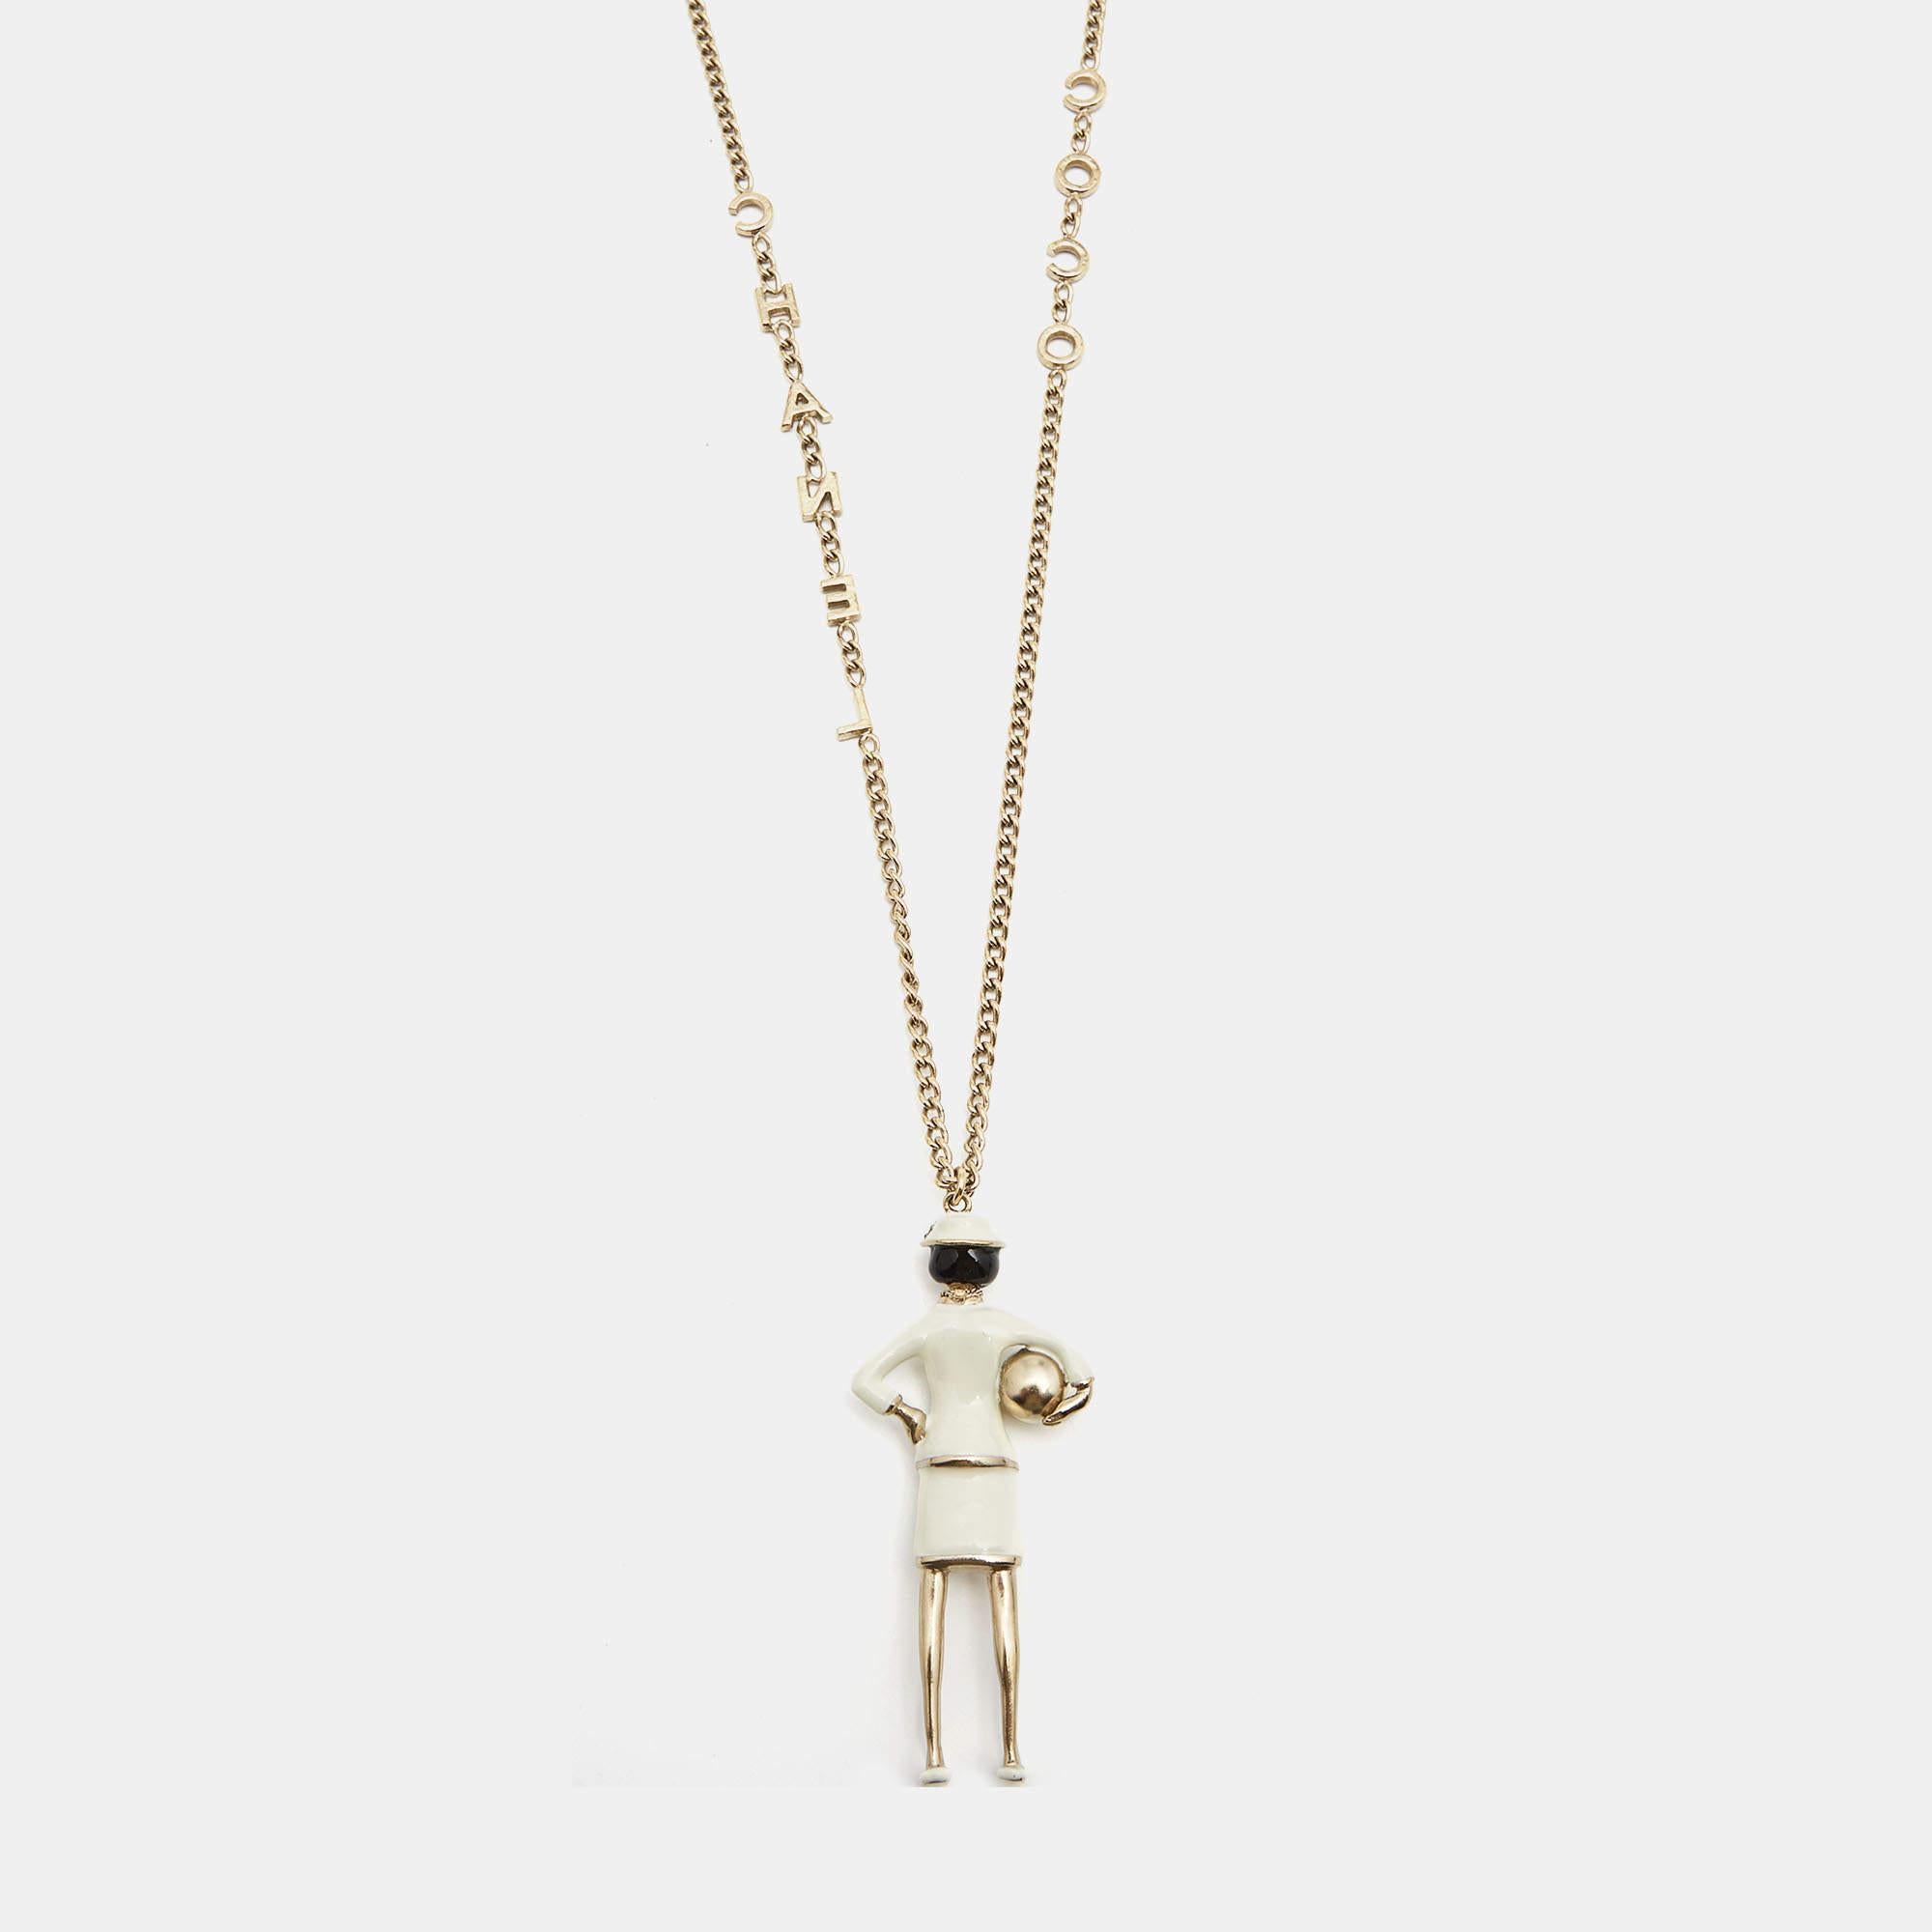 Bringing out the brand's charm in simple ways, Chanel presents this pretty pendant necklace that you can wear solo or layer with other chains. The necklace is crafted from gold-tone metal, and it has an eye-catching pendant.

Includes
Original